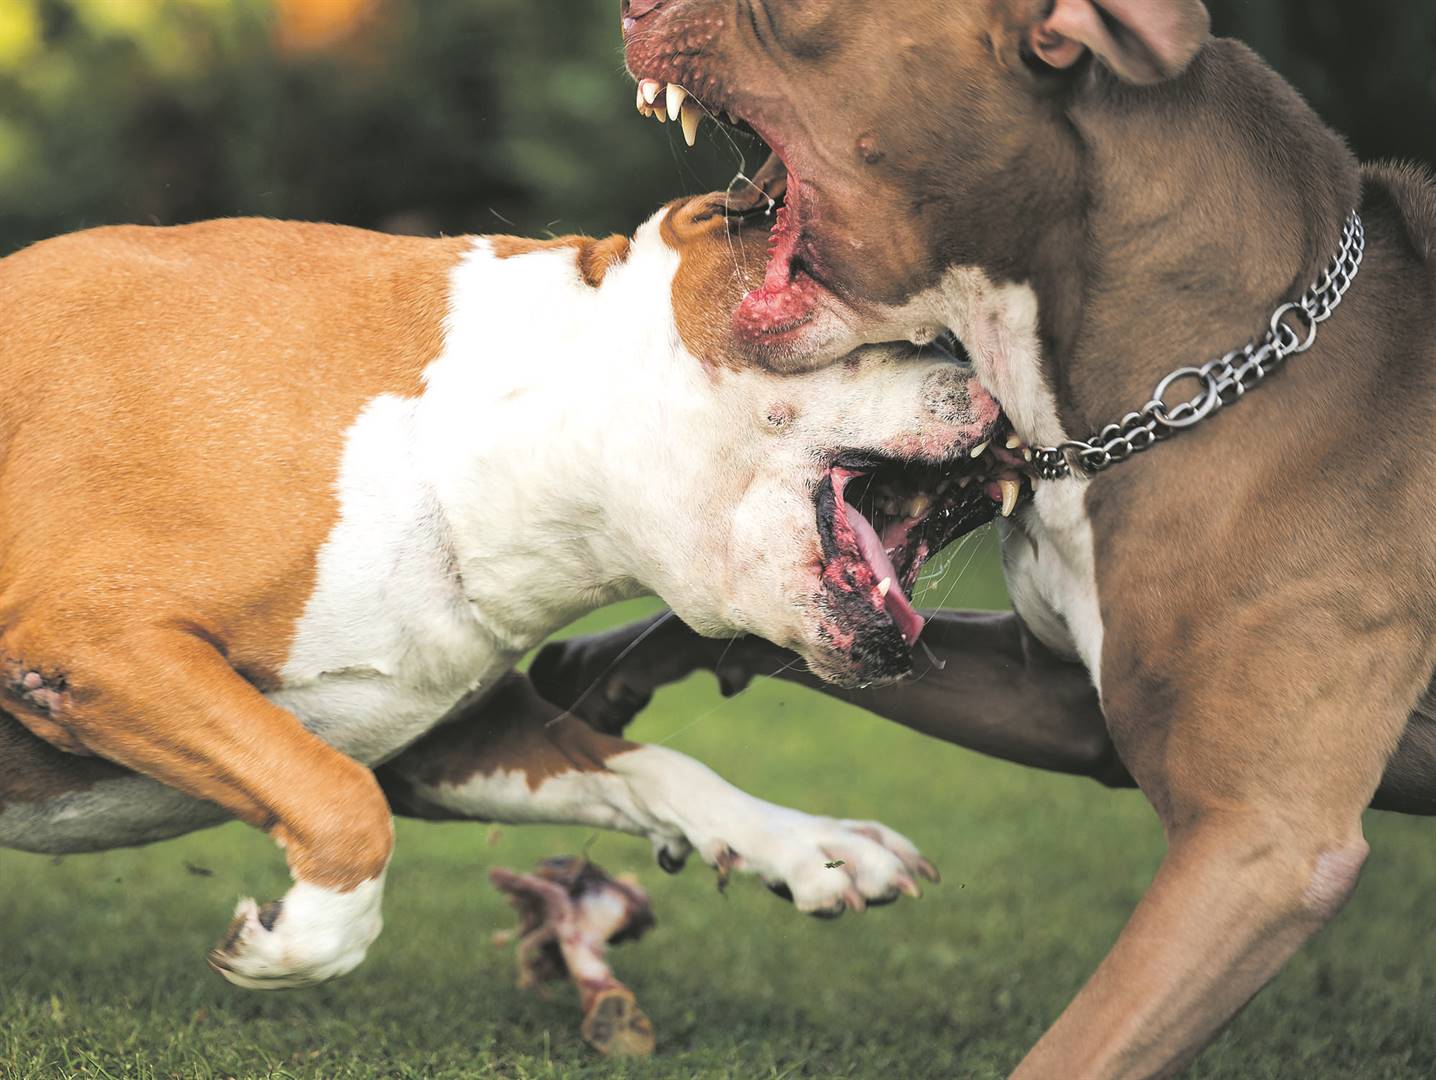 Tshwane is gripped by fear after an alleged rapist, who reportedly drugs his victims and sets his vicious pit bull terriers on them to subdue them.